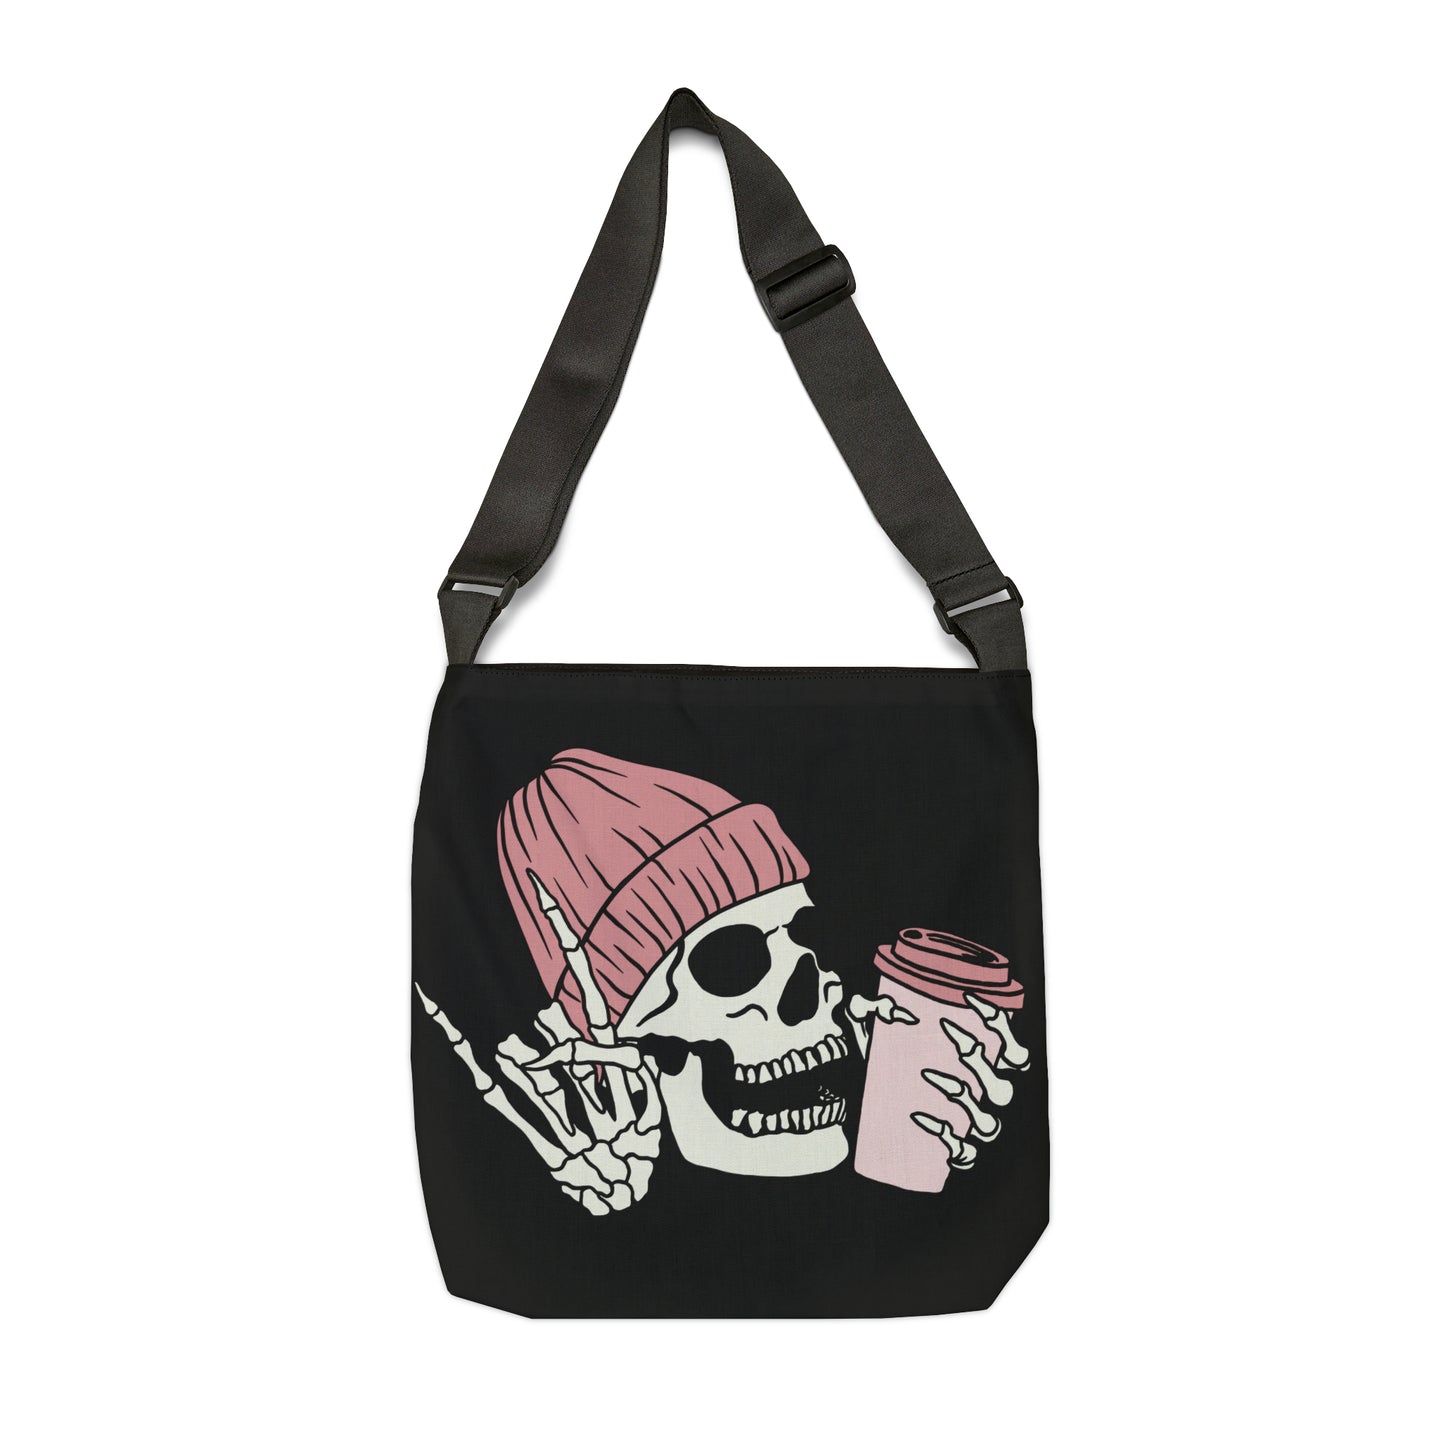 Adjustable Tote Bag (AOP) - Drinking Coffee Skull Tote Bag, Comes in 2 Sizes, Adjustabe Straps